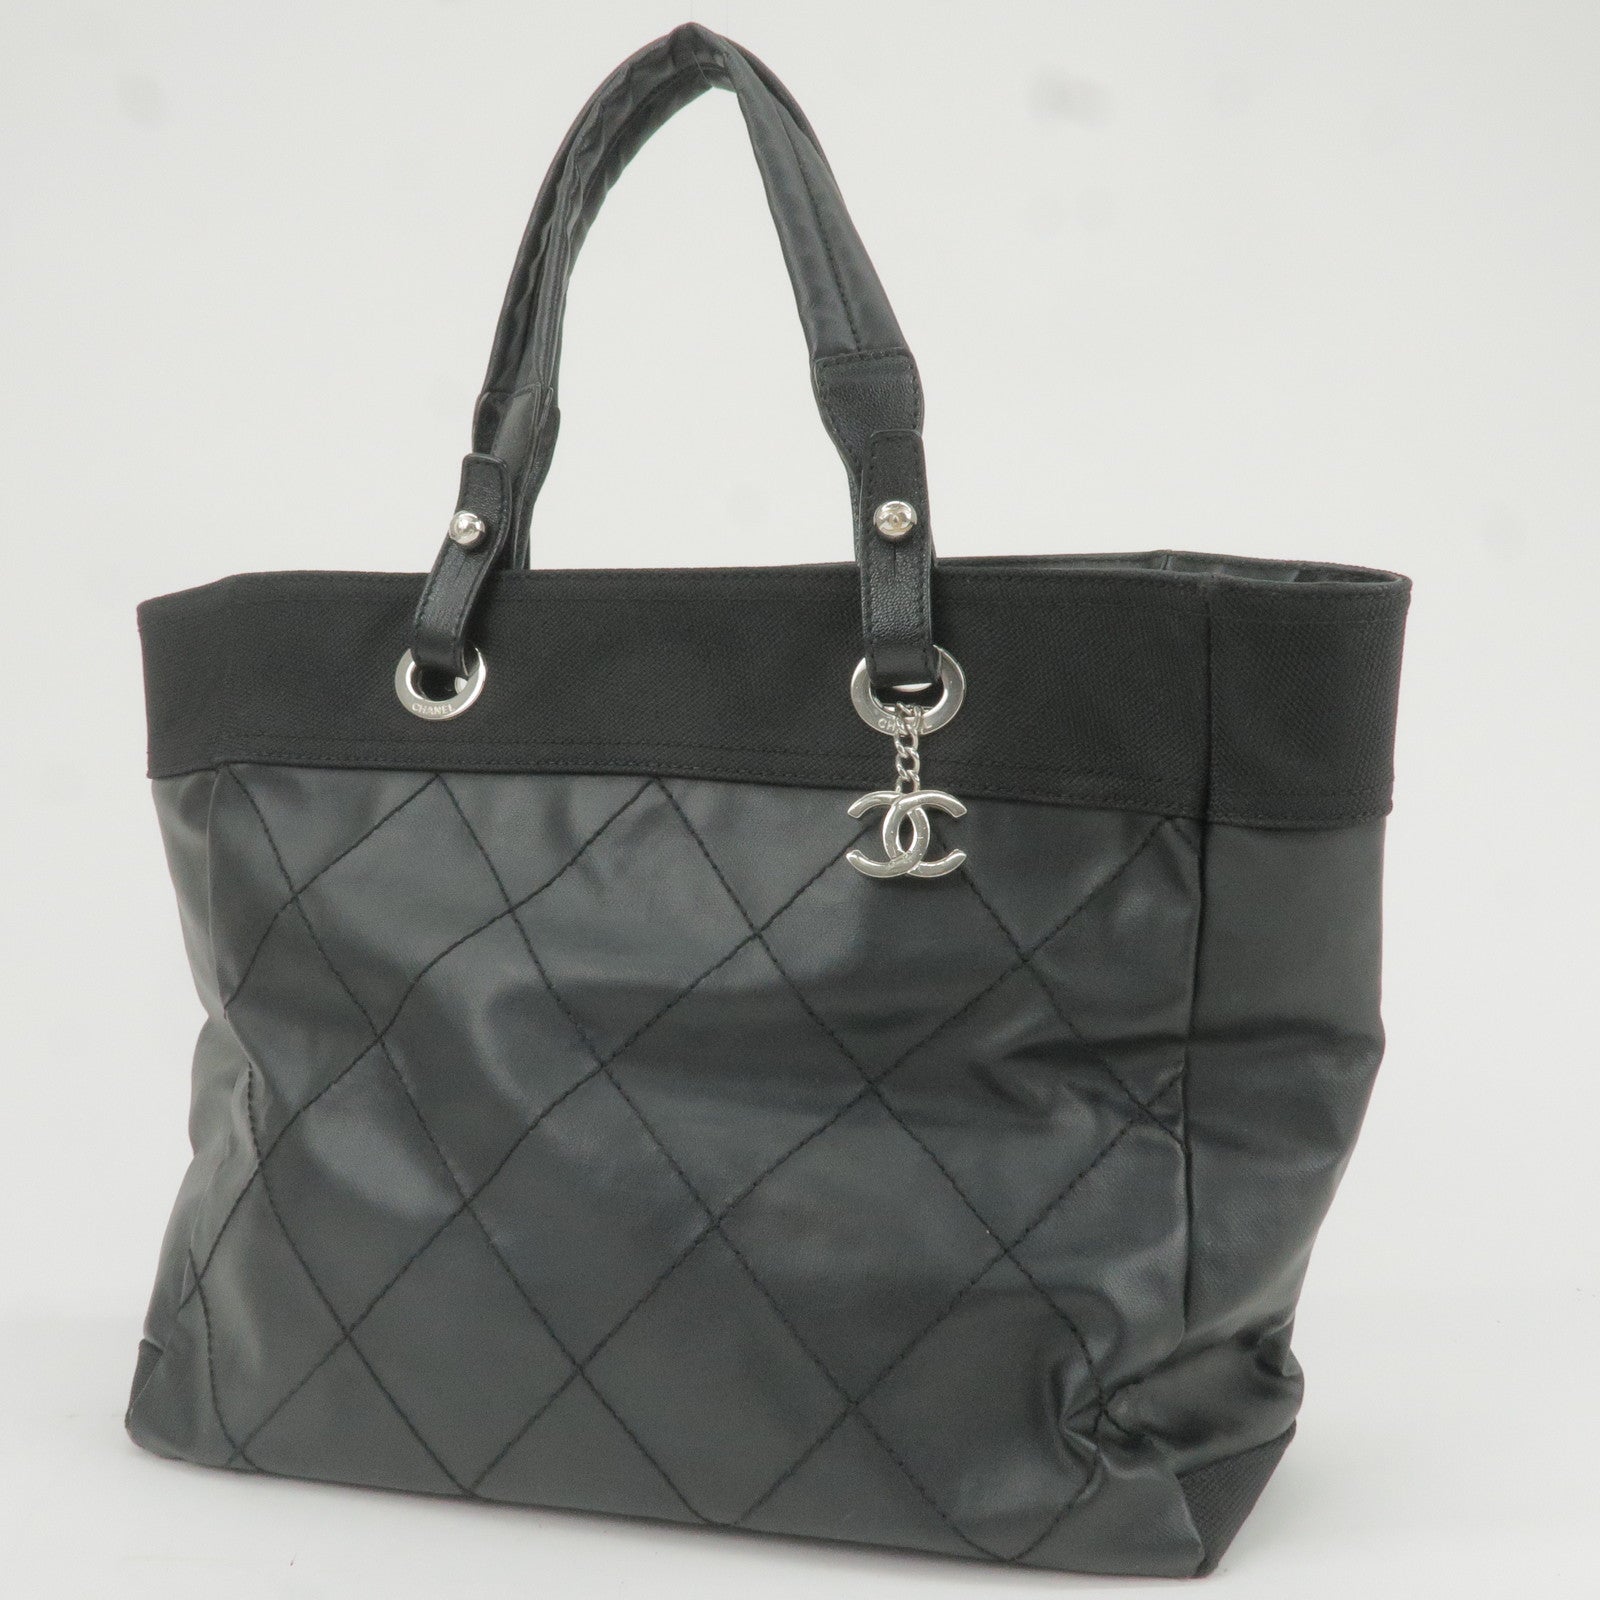 CHANEL-Paris-Biarritz-MM-Coated-Canvas-Leather-Tote-Bag-A34209